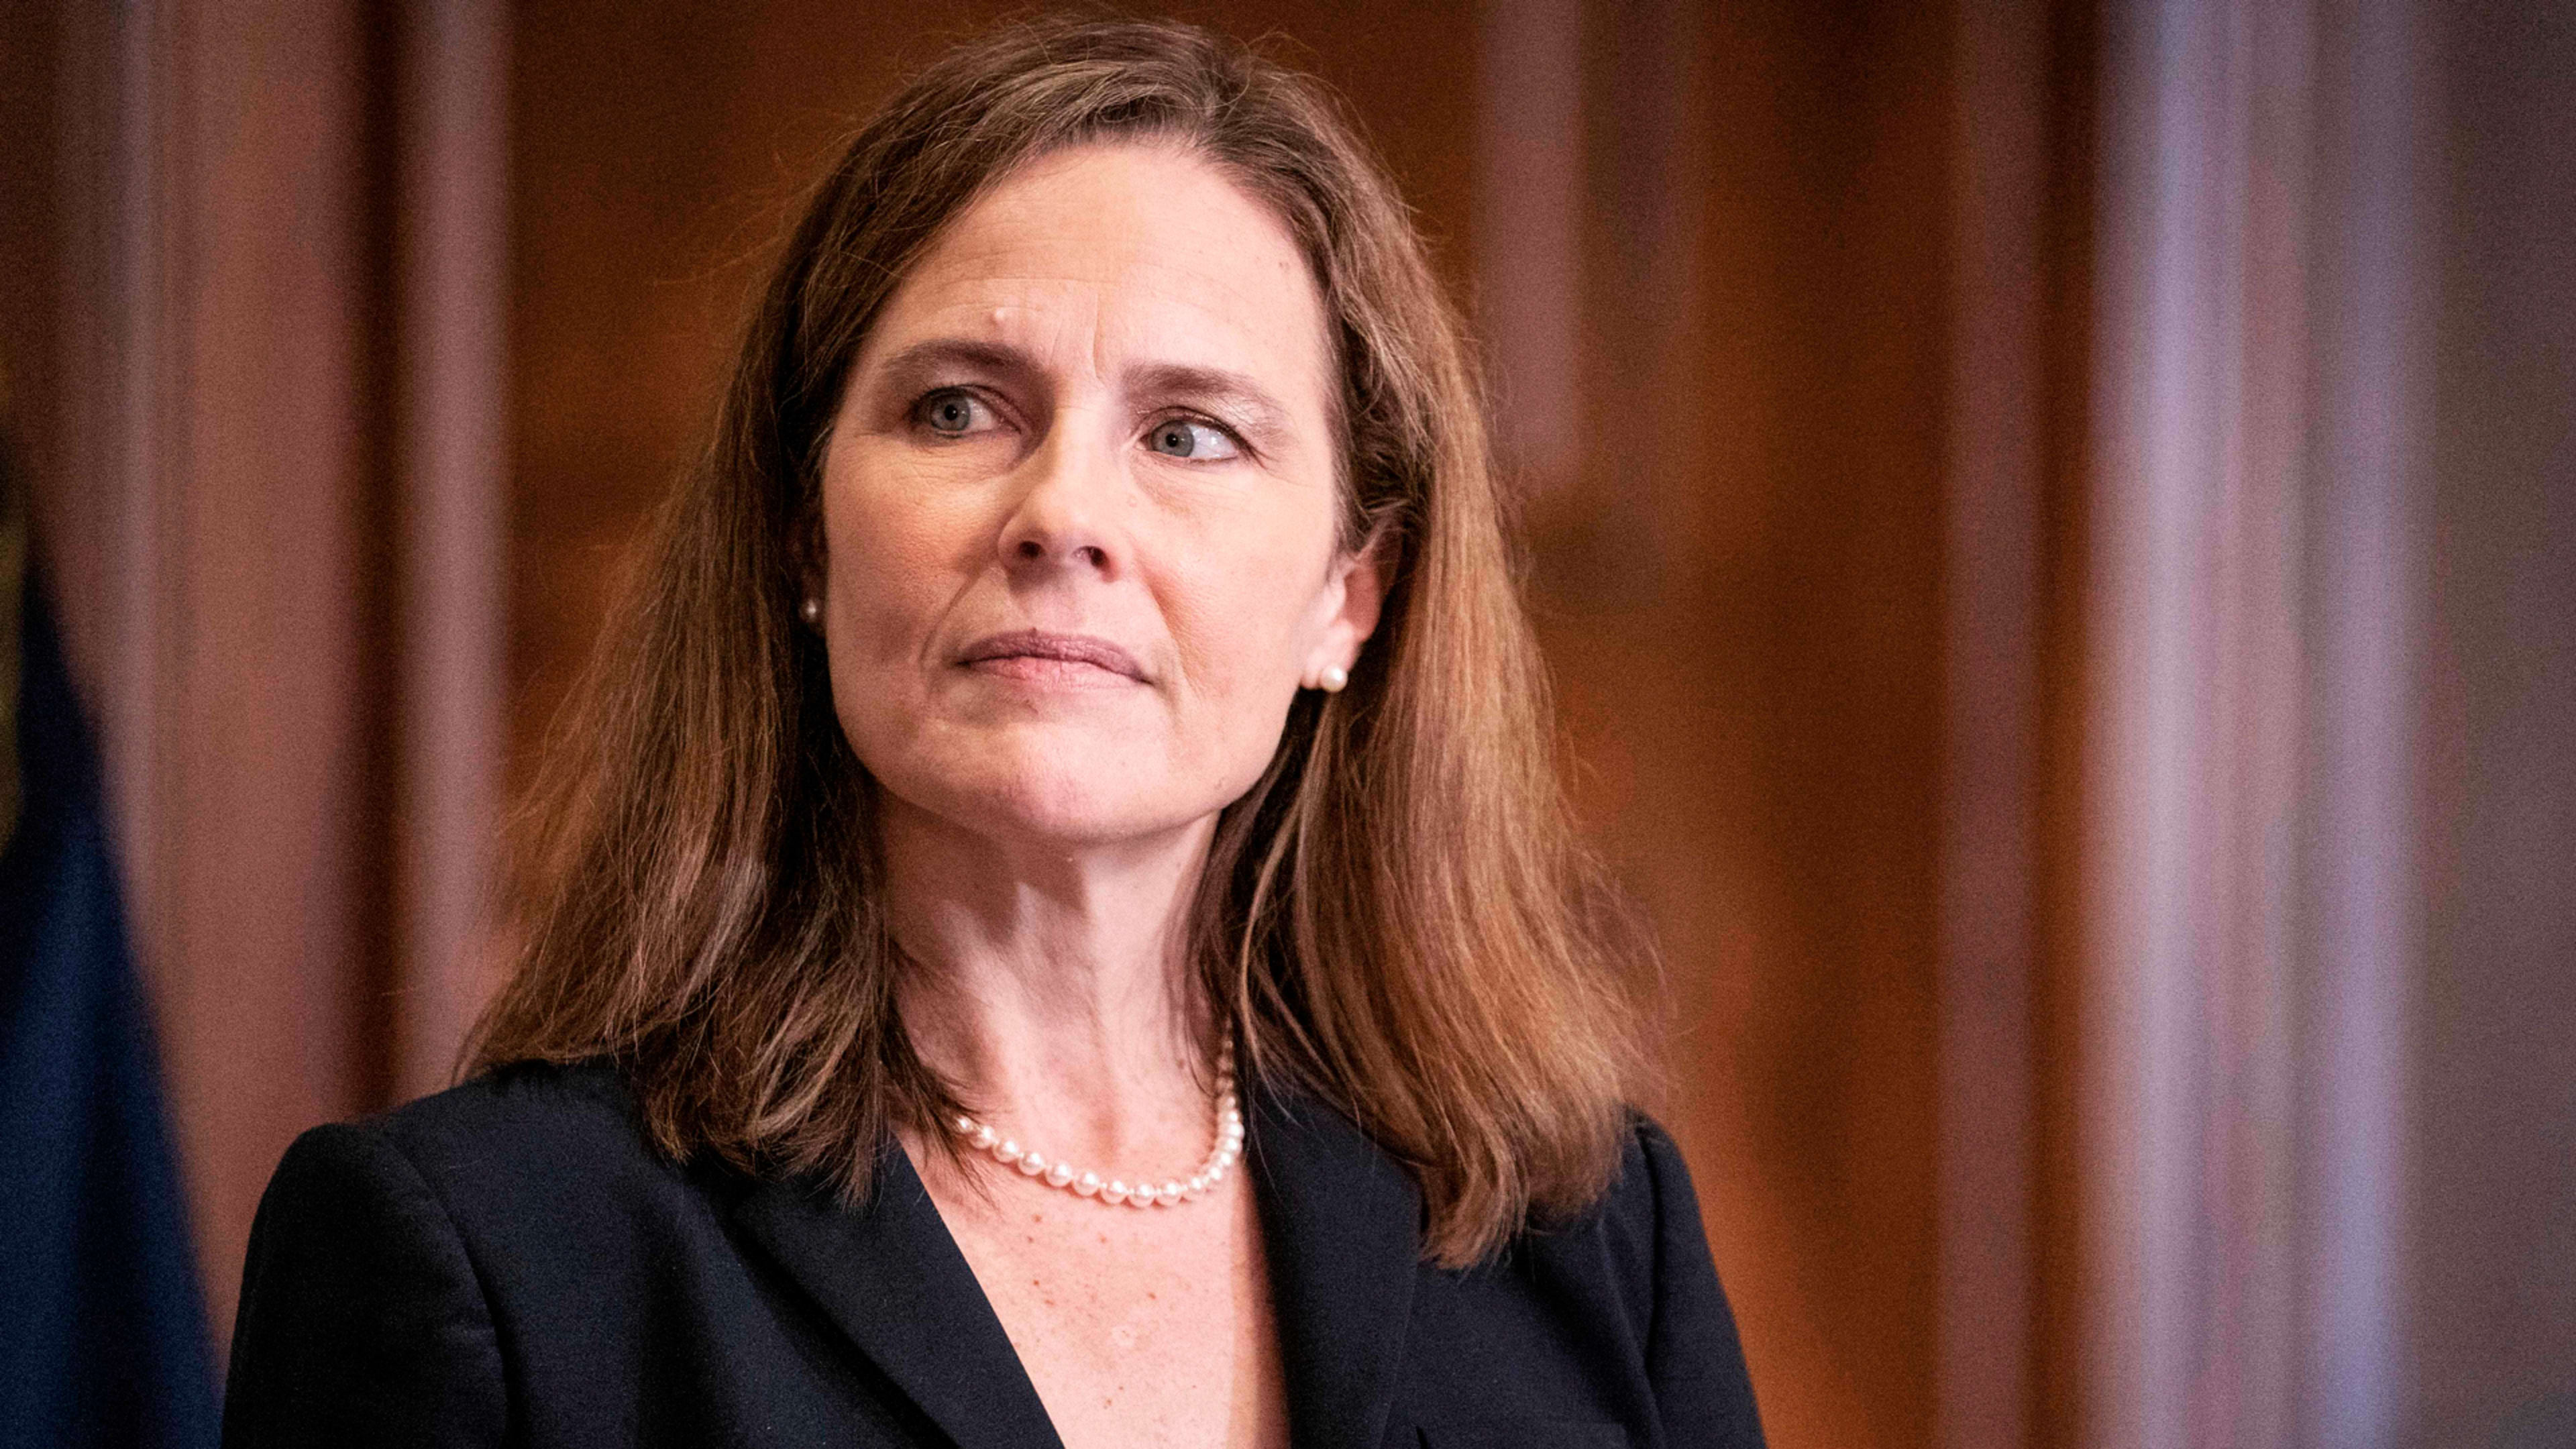 Amy Coney Barrett update: What’s next for the Senate confirmation vote?